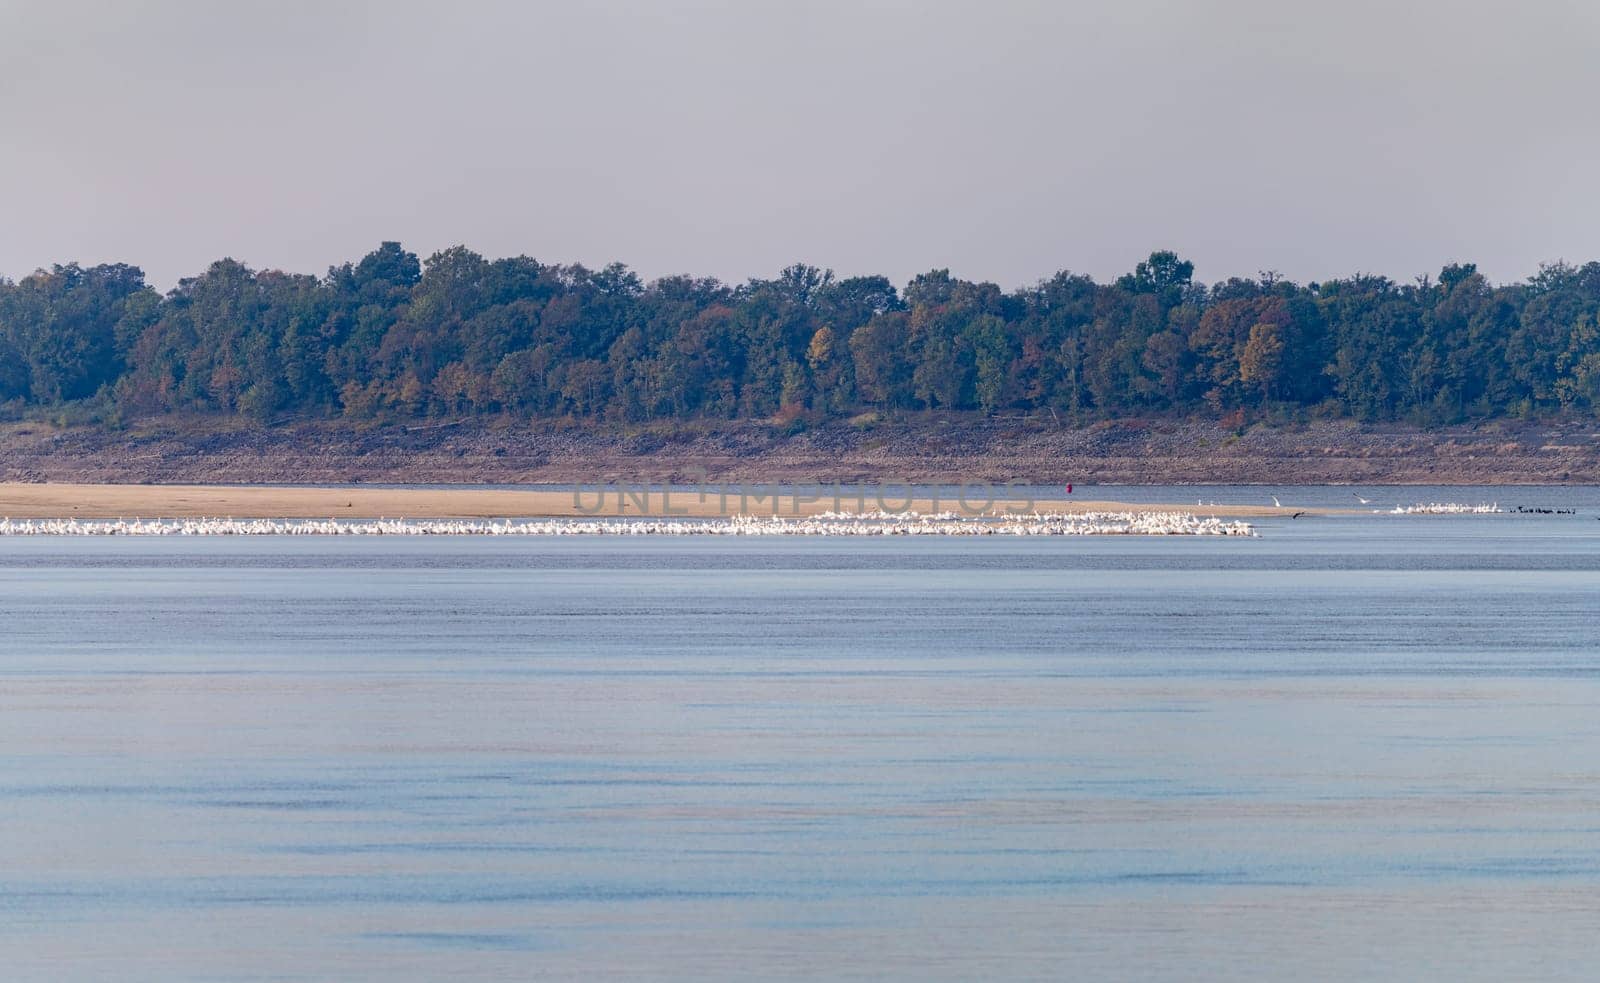 Large group of white pelicans in flock on sandy beach exposed due to drought by steheap